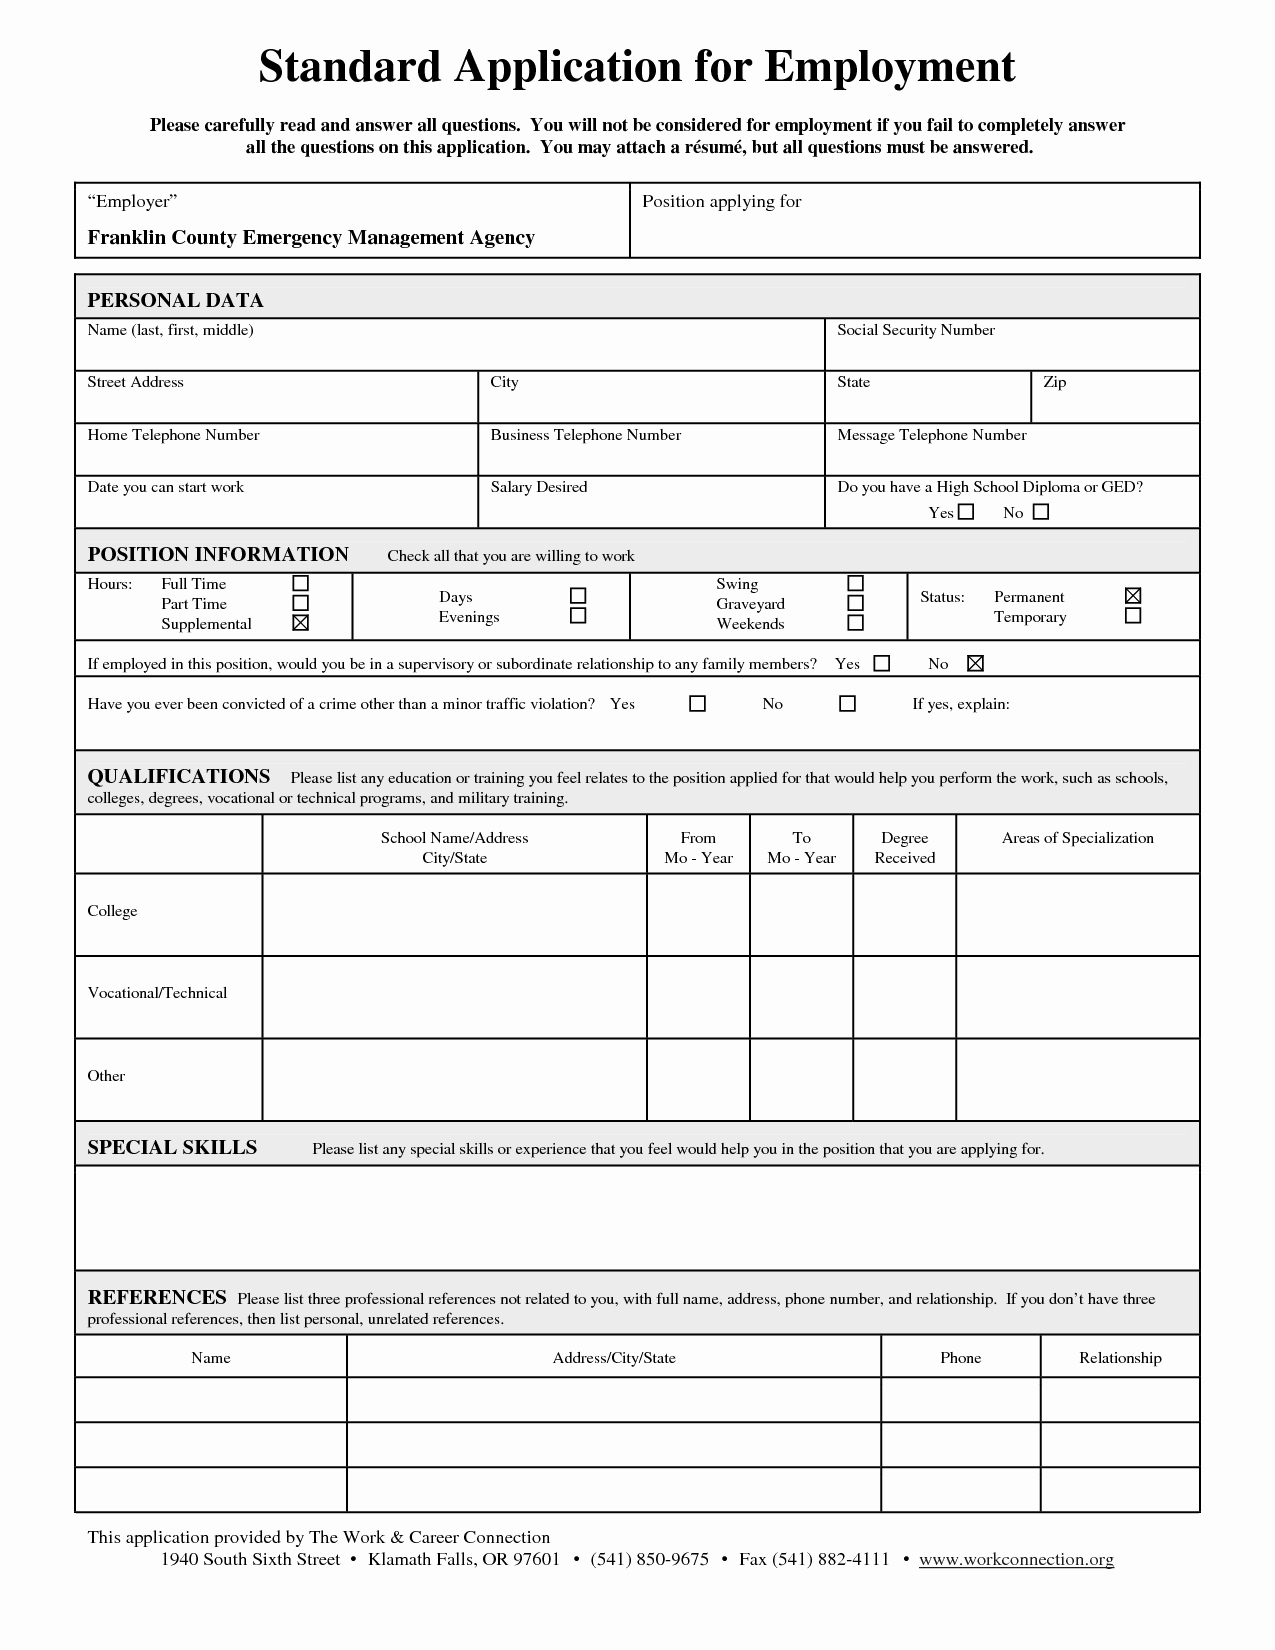 Application for Employment form Free Beautiful Standard Job Application form